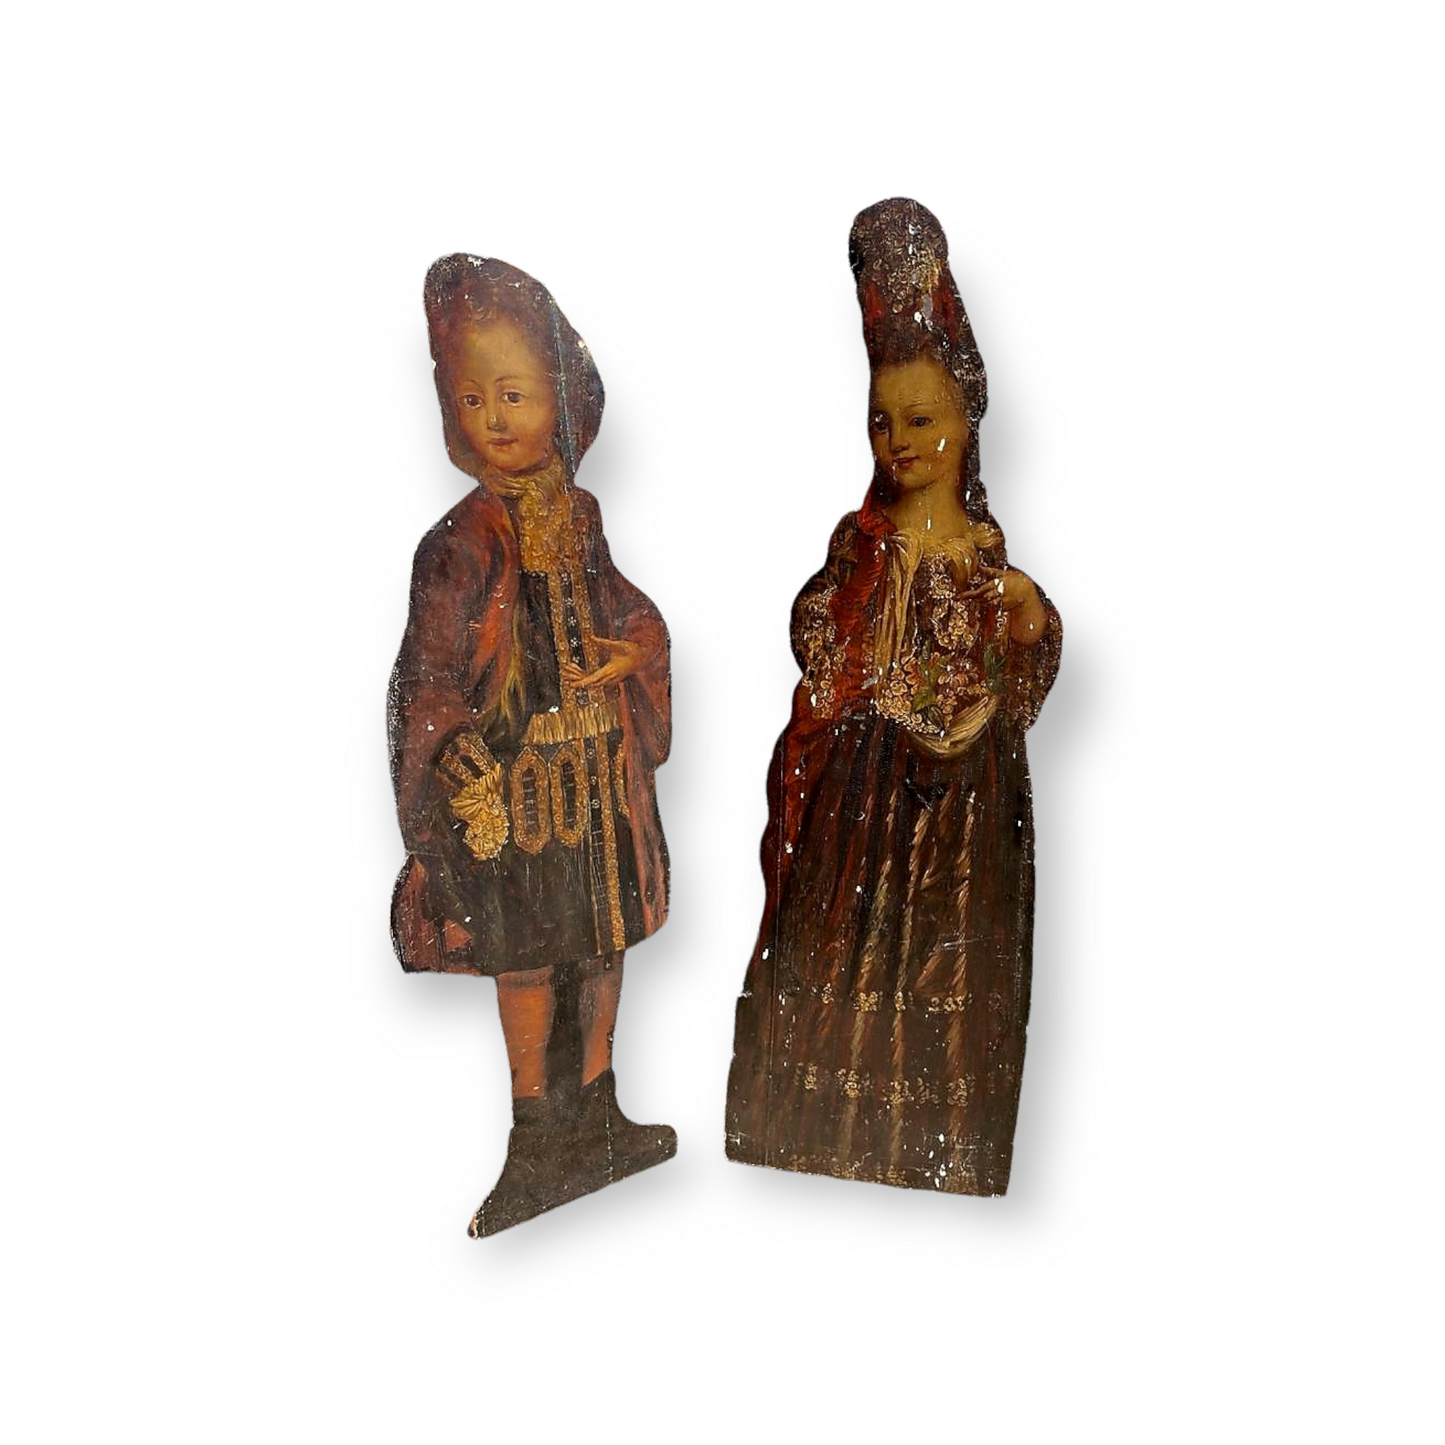 Pair of Early 18th Century English Antique Dummy Boards of an Aristocratic Boy and Girl